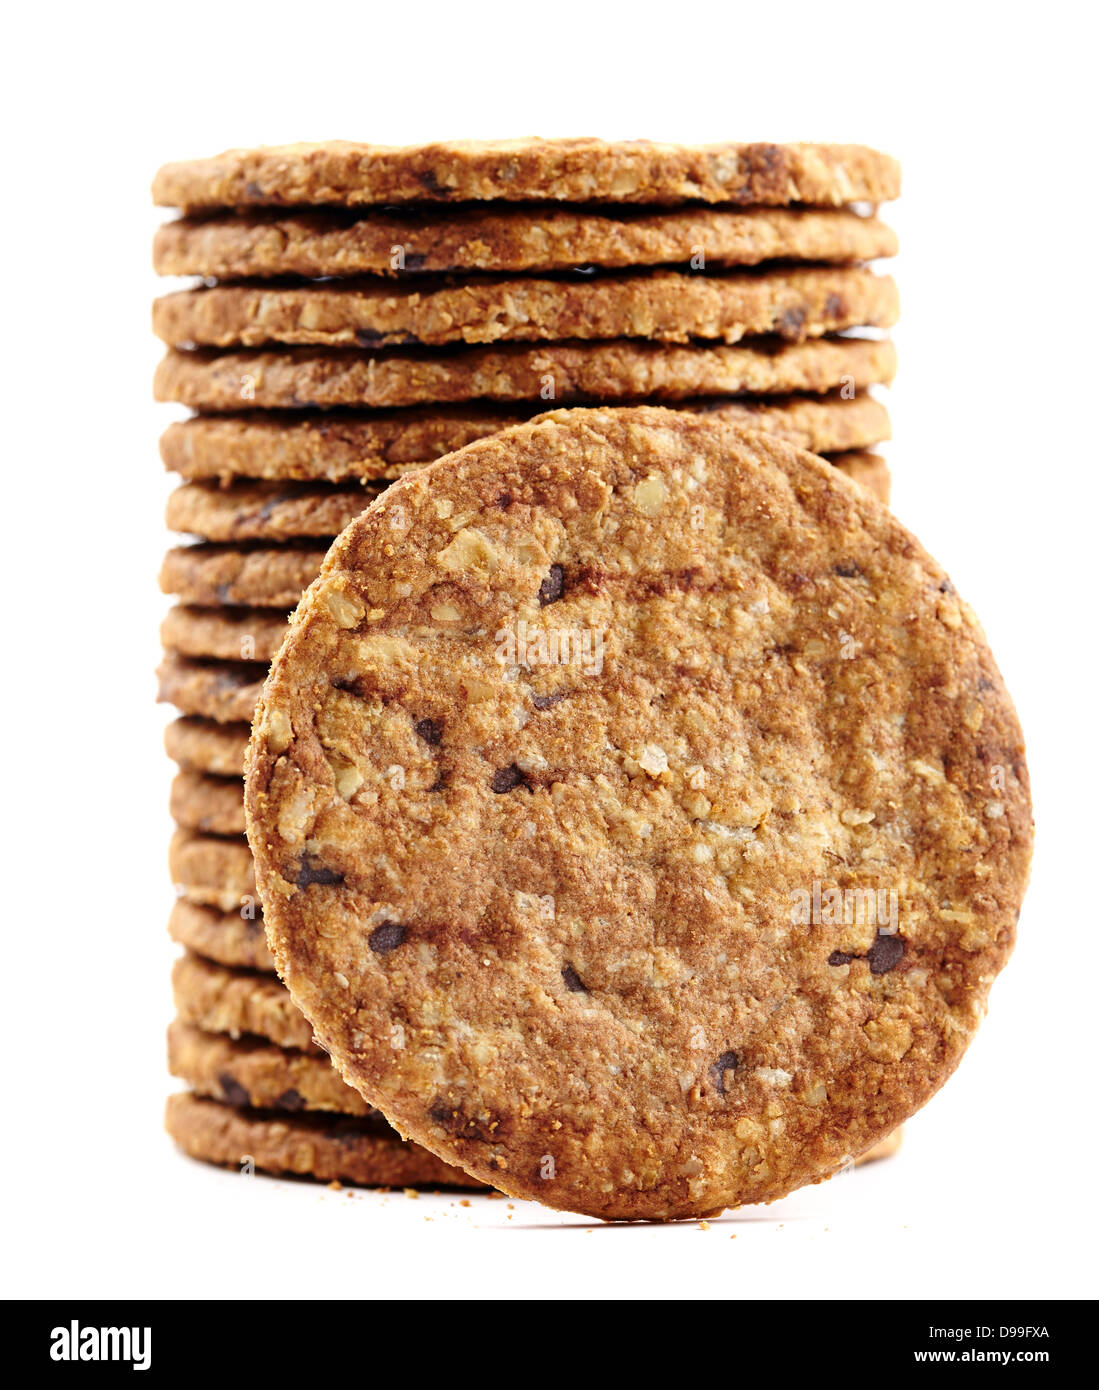 Digestive bio wholegrain biscuits with chocolate chips isolated on white background Stock Photo